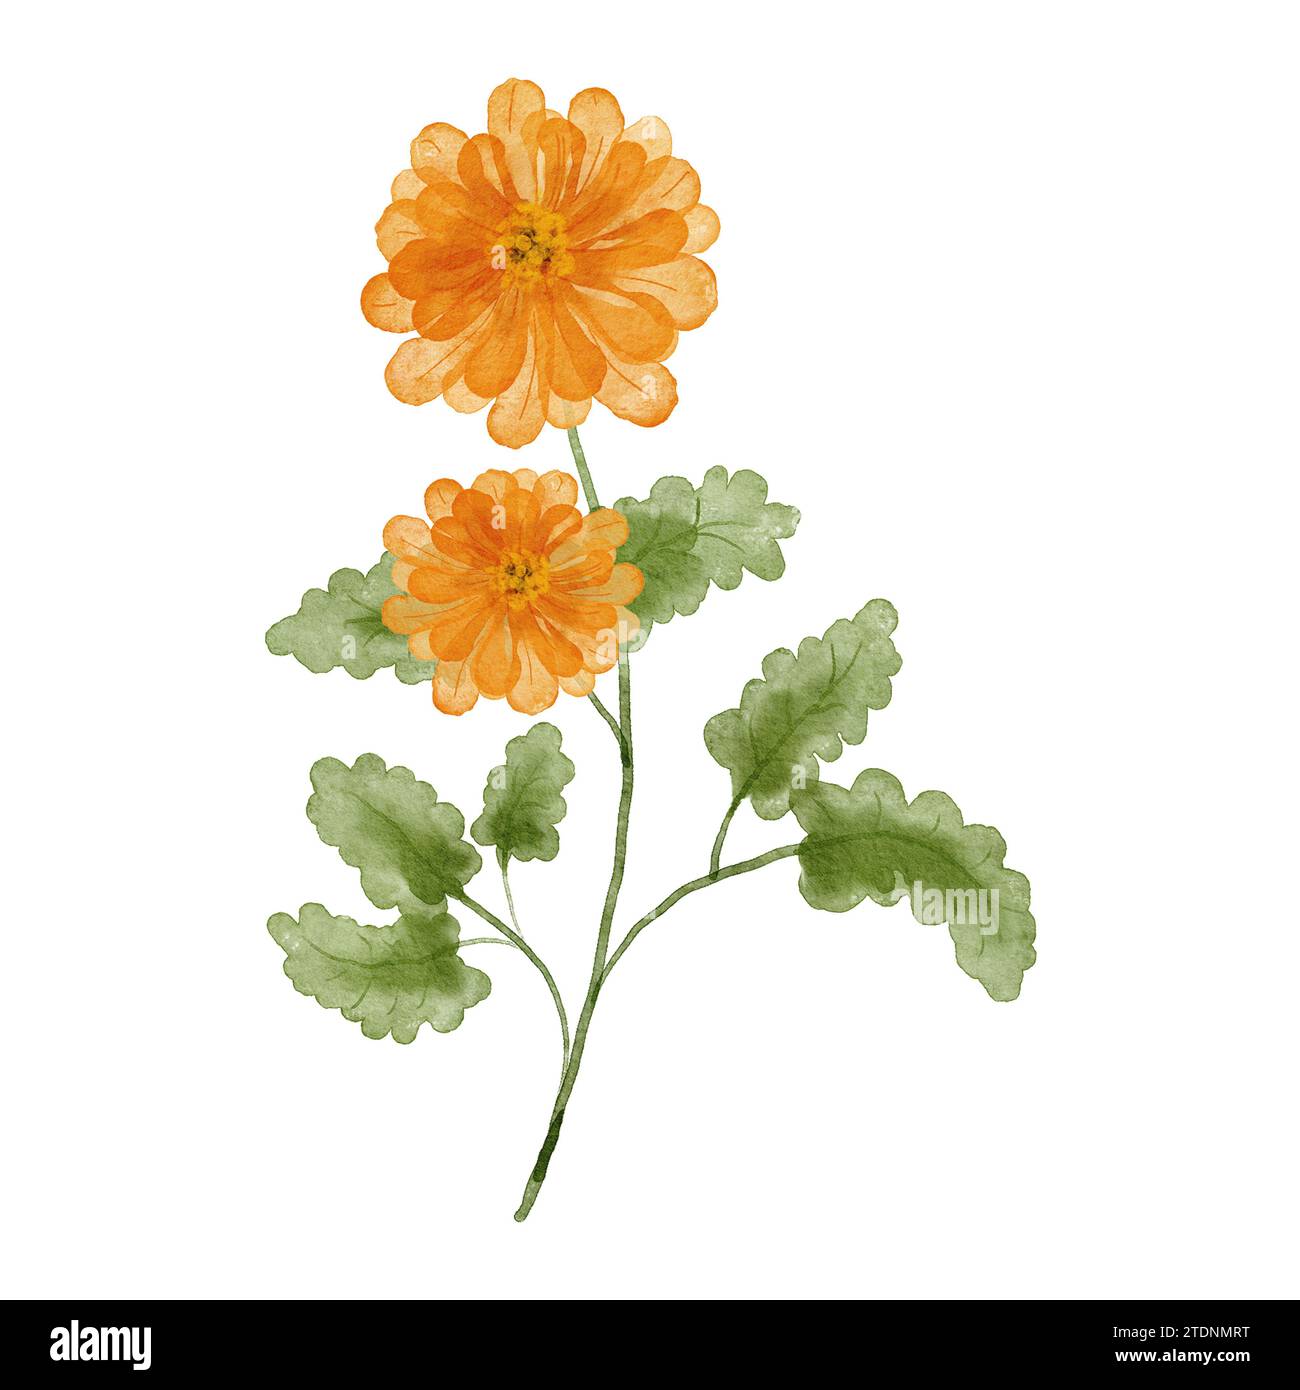 Watercolor chrysanthemum flowers. Chrysanthemum isolated on white background. A bouquet of yellow flowers. Stock Photo